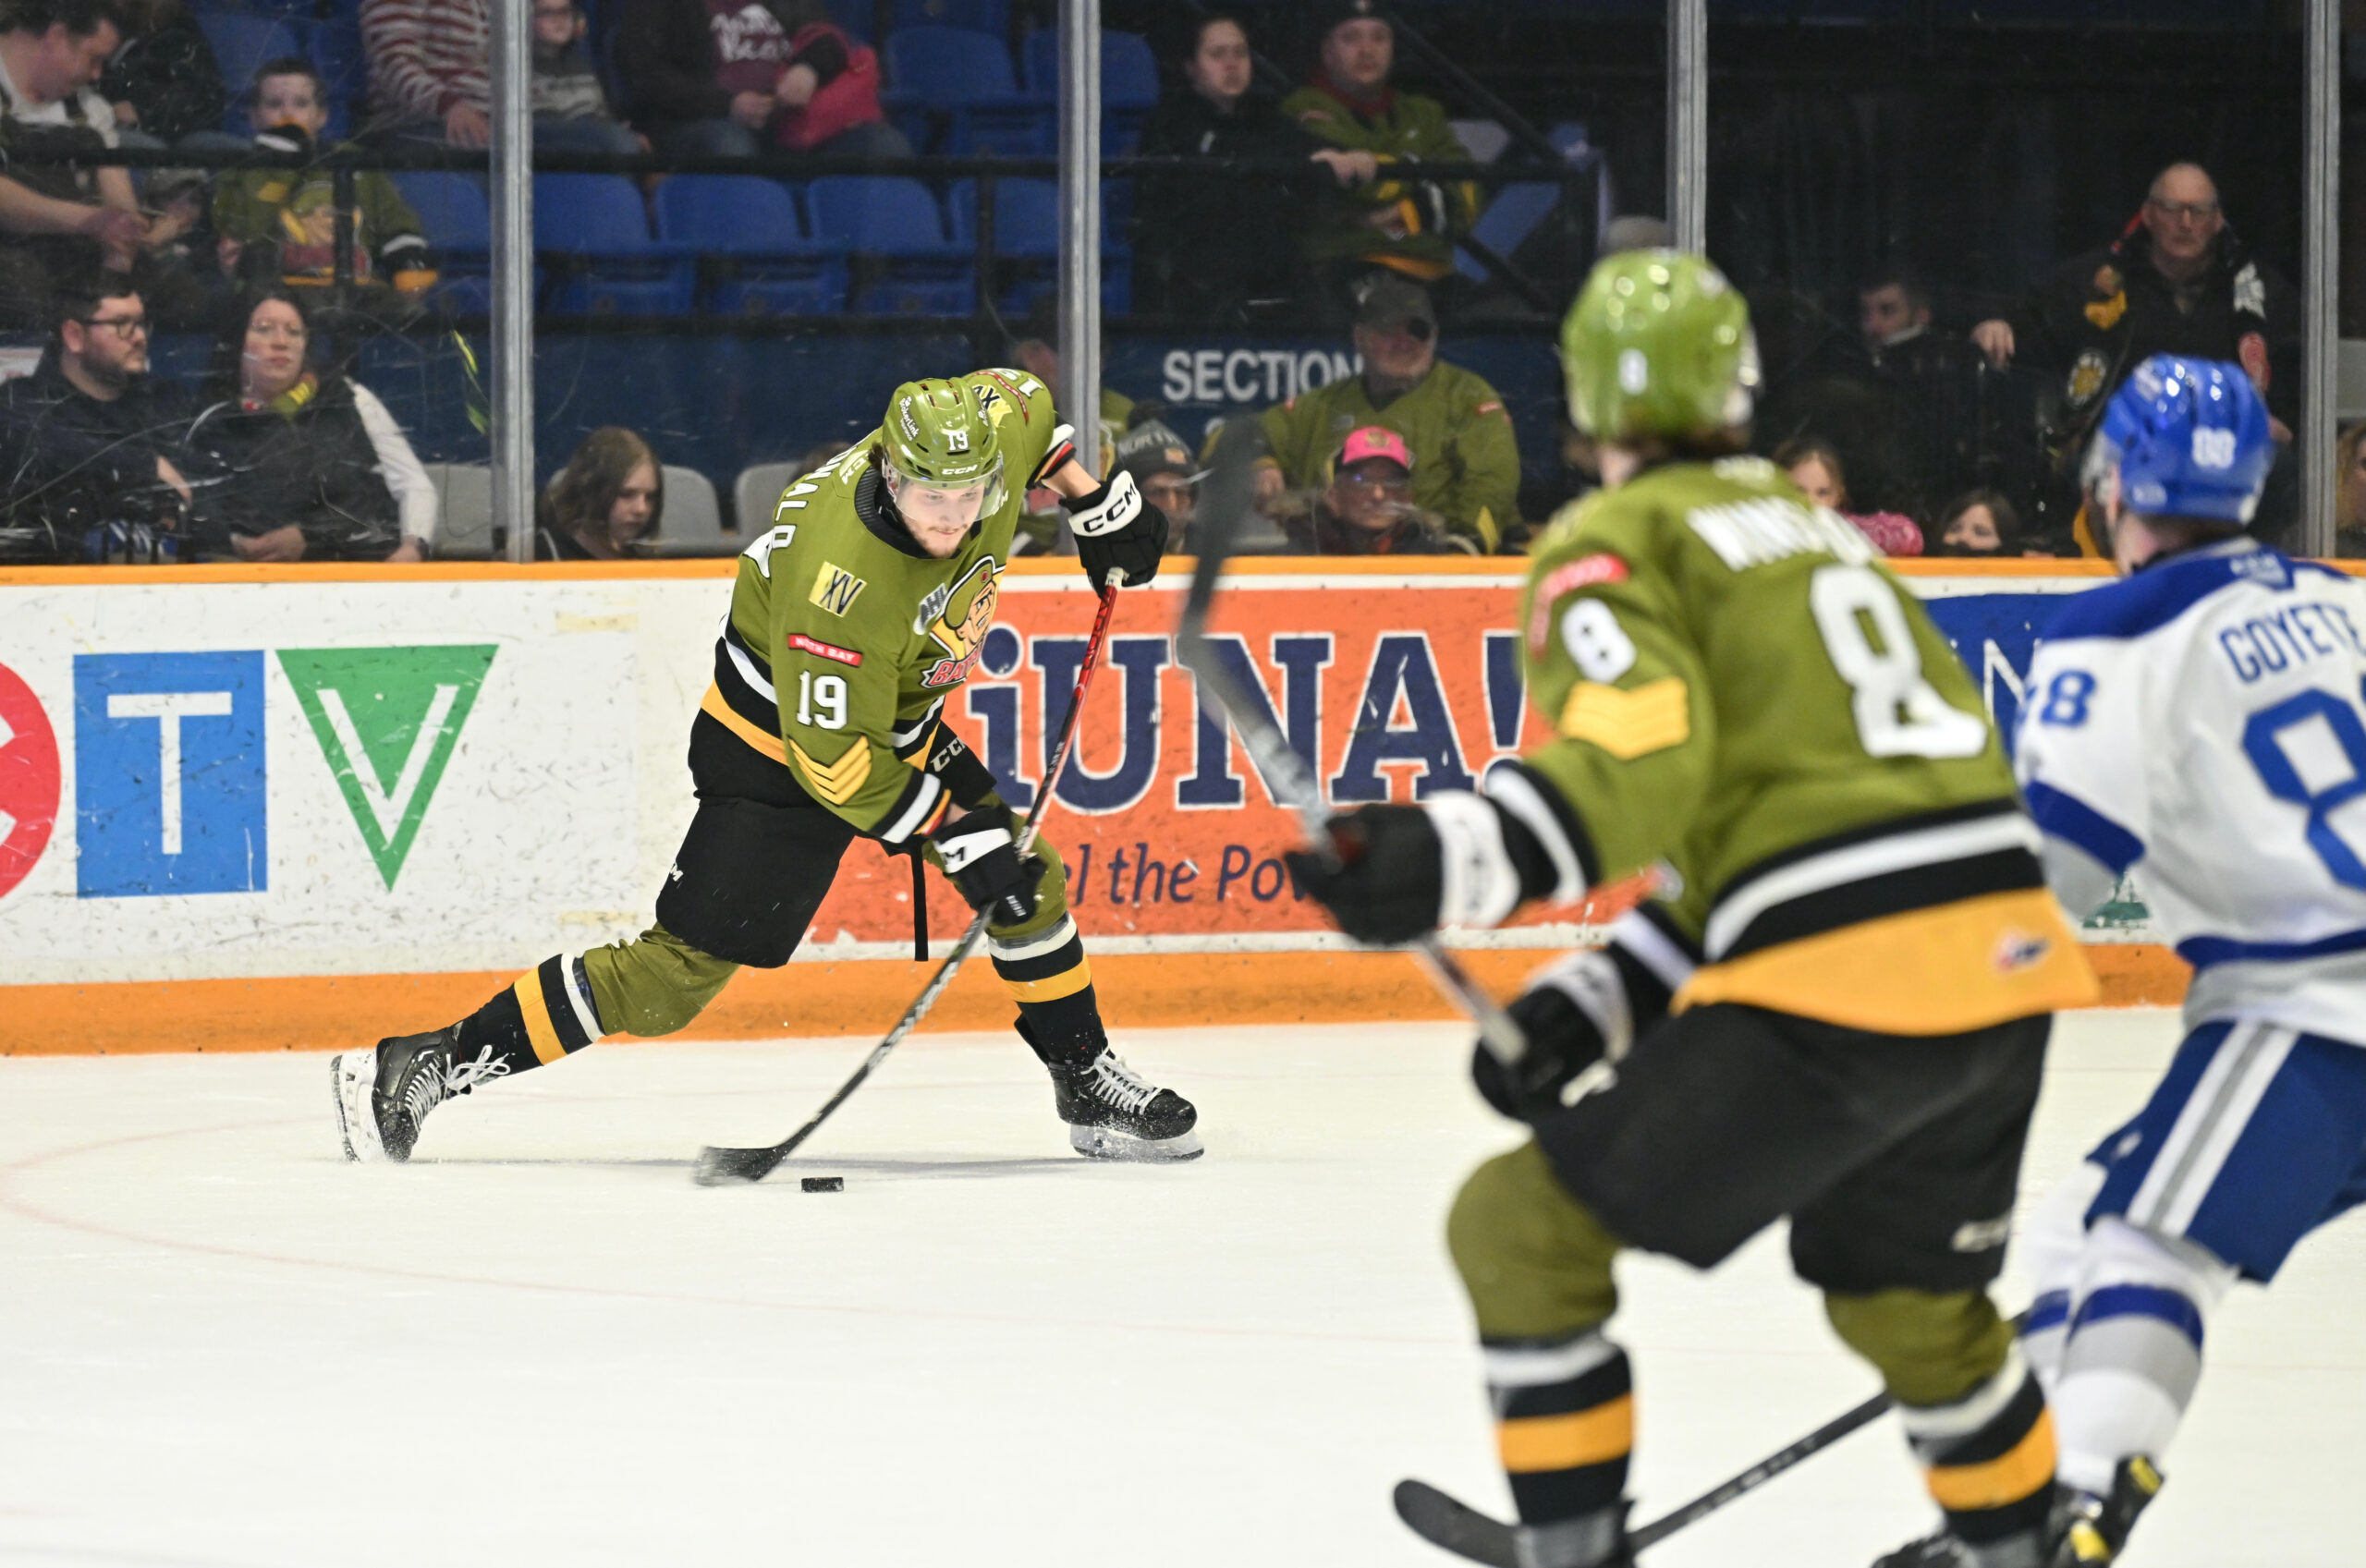 Junior Hockey skates to centre stage with OHL Playoffs starting tonight Humber News